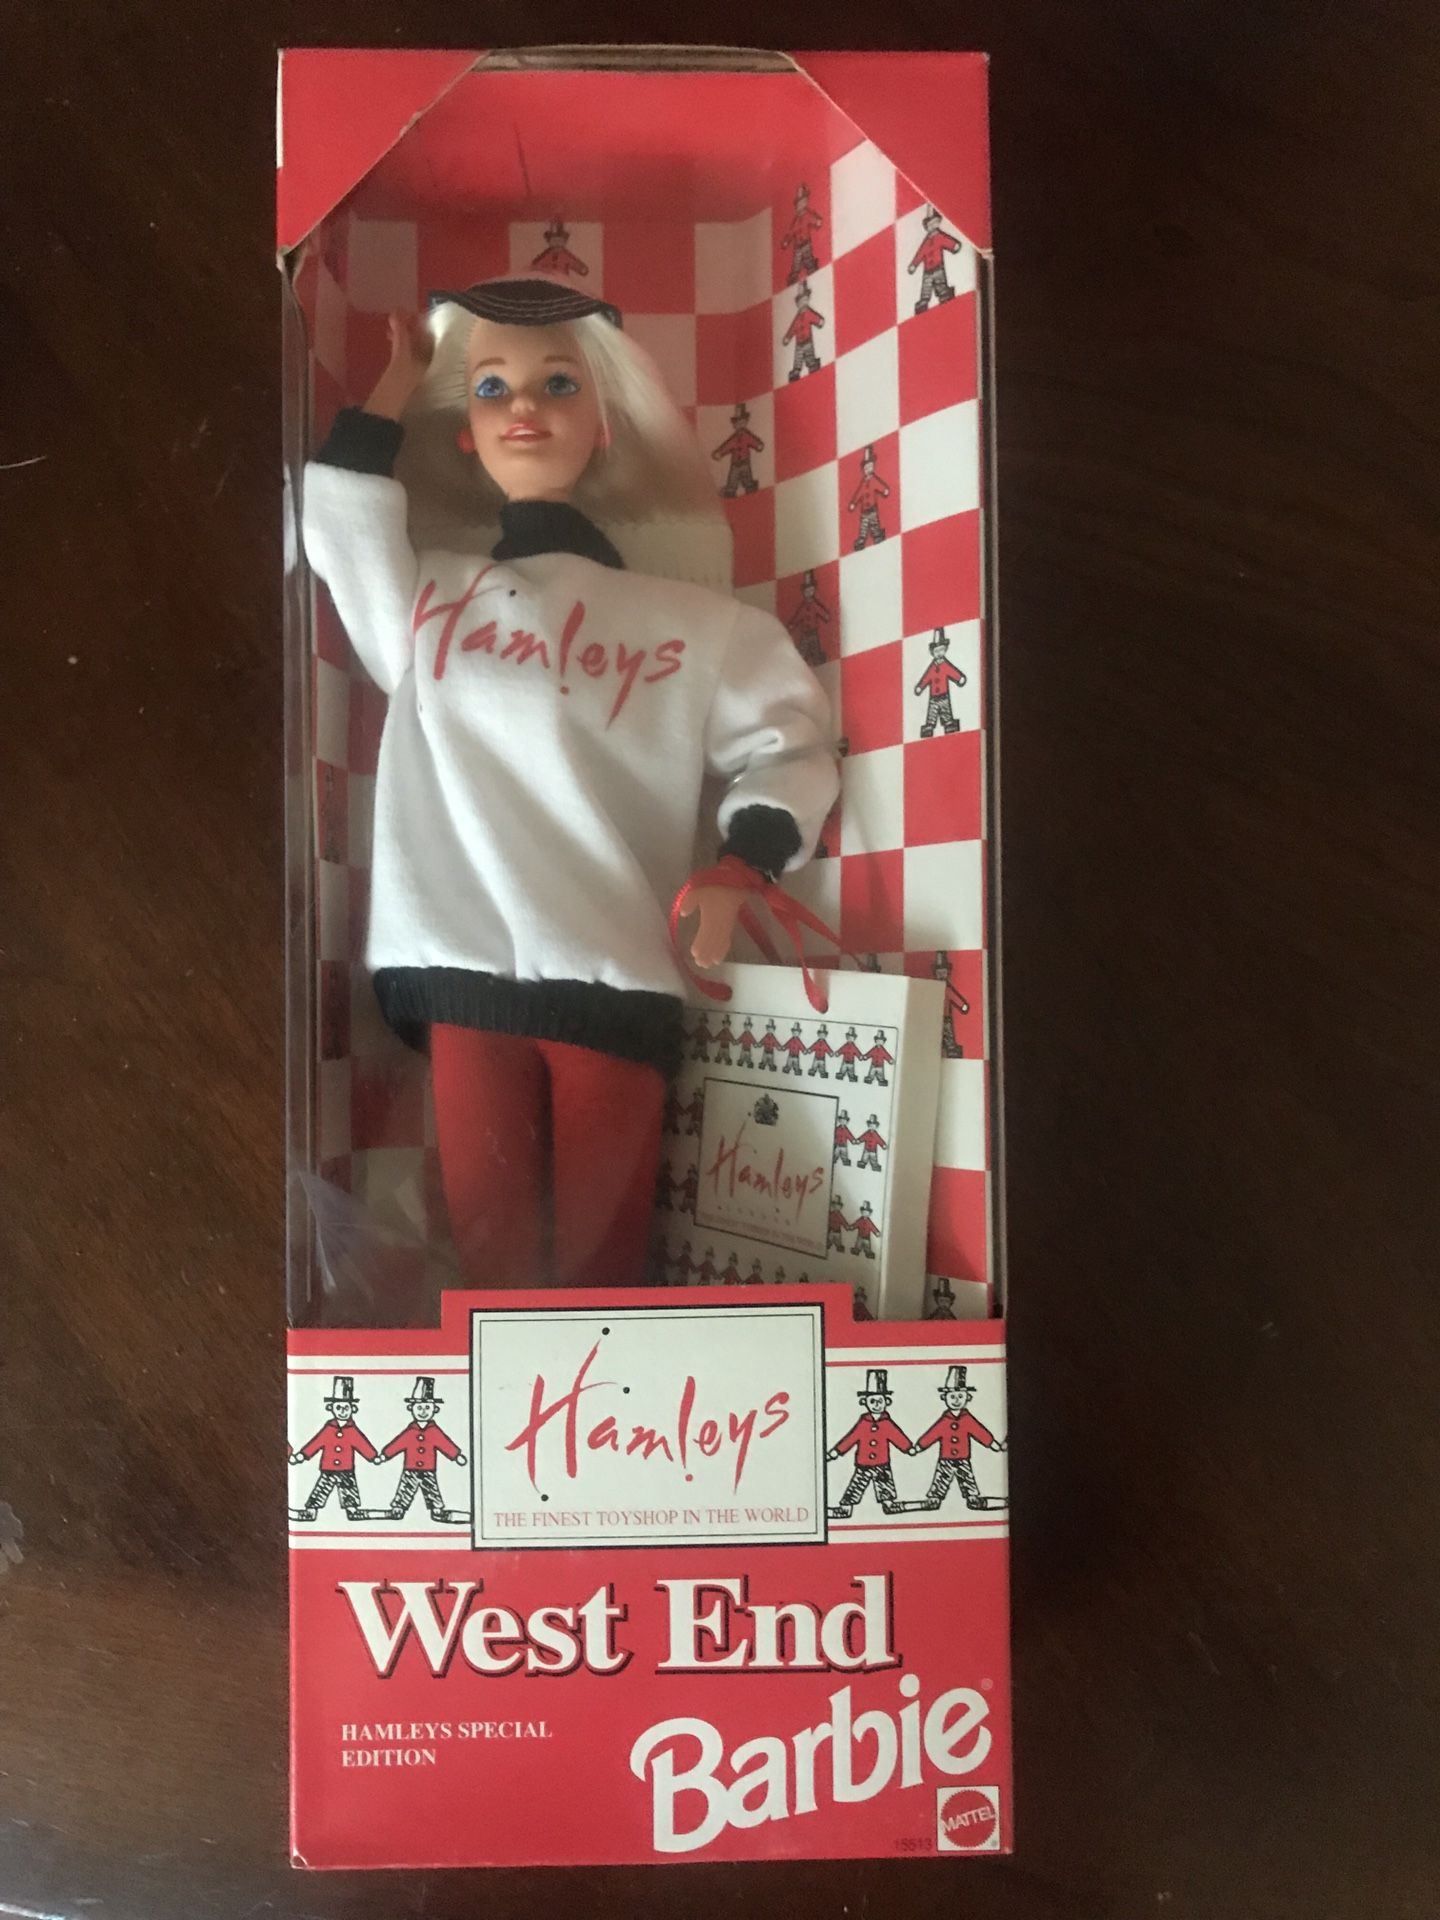 Hamleys Special Edition West End Barbie. Hamleys is the oldest & largest toy store in London.